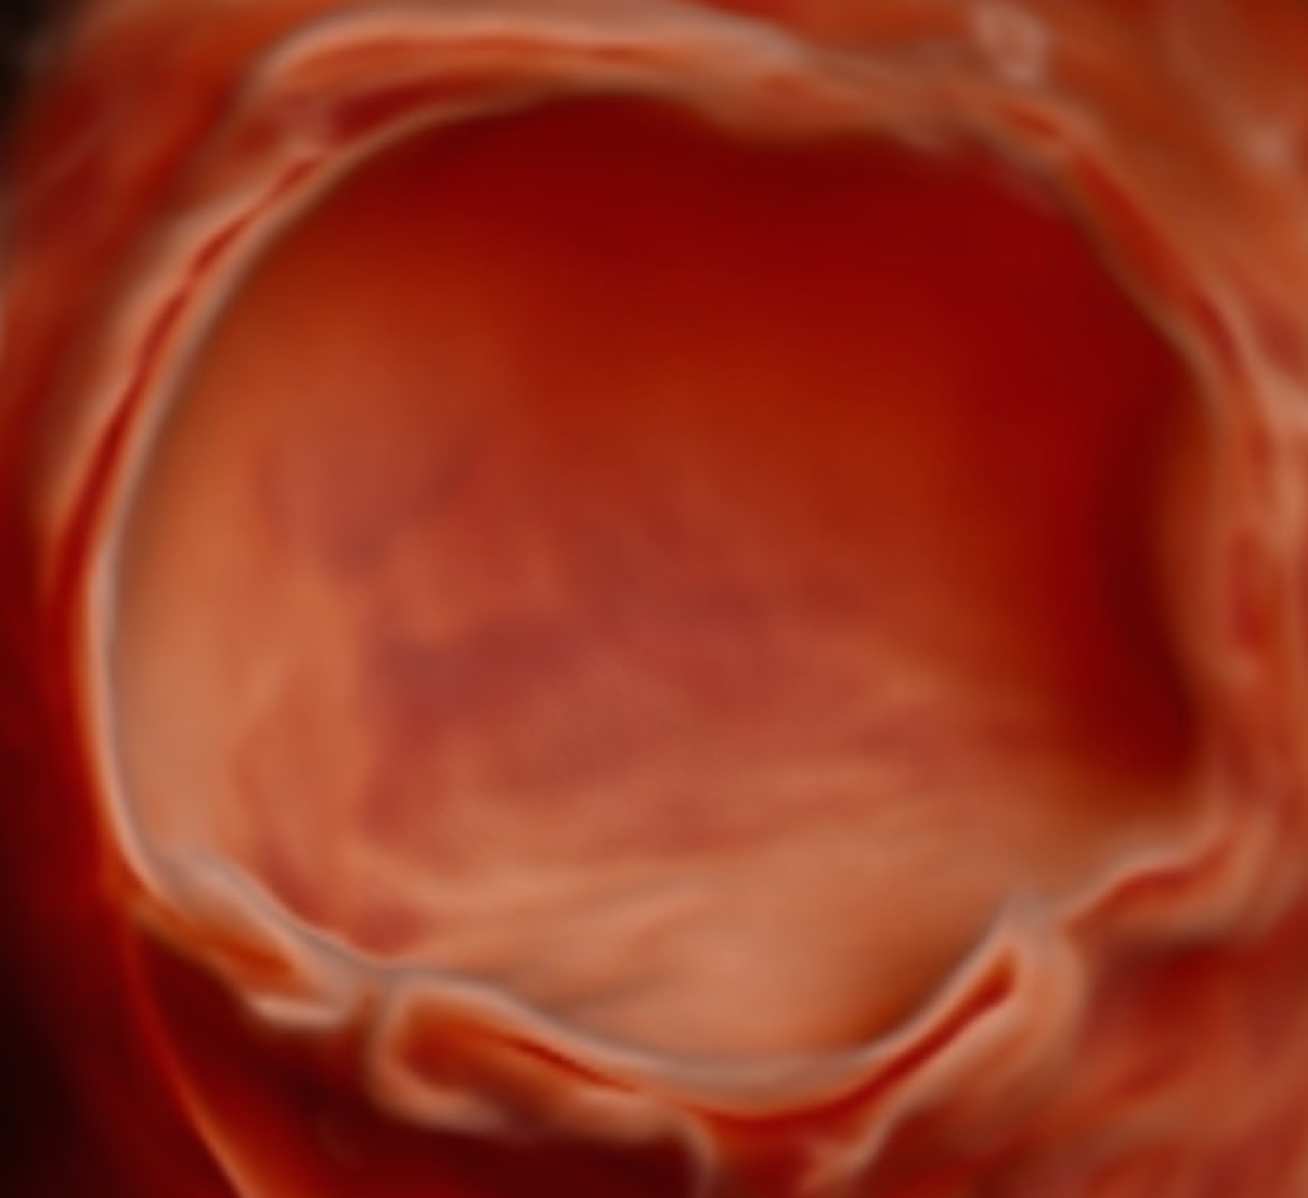 Benign (non-cancerous) ovarian cyst, viewed using ultrasound